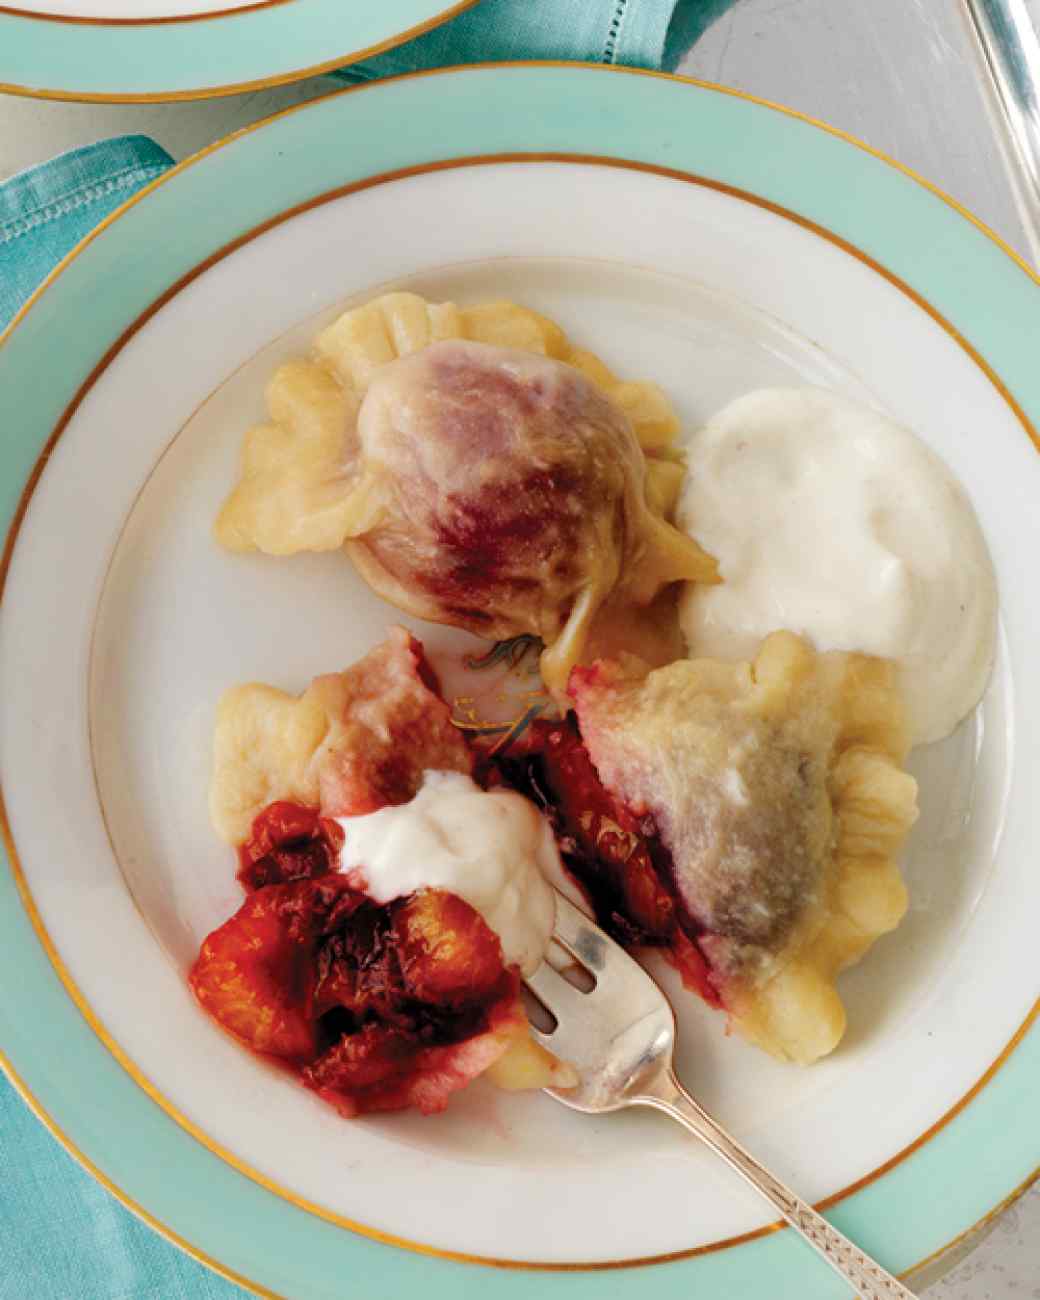 Perogies with Italian plum filling and spiced sour cream